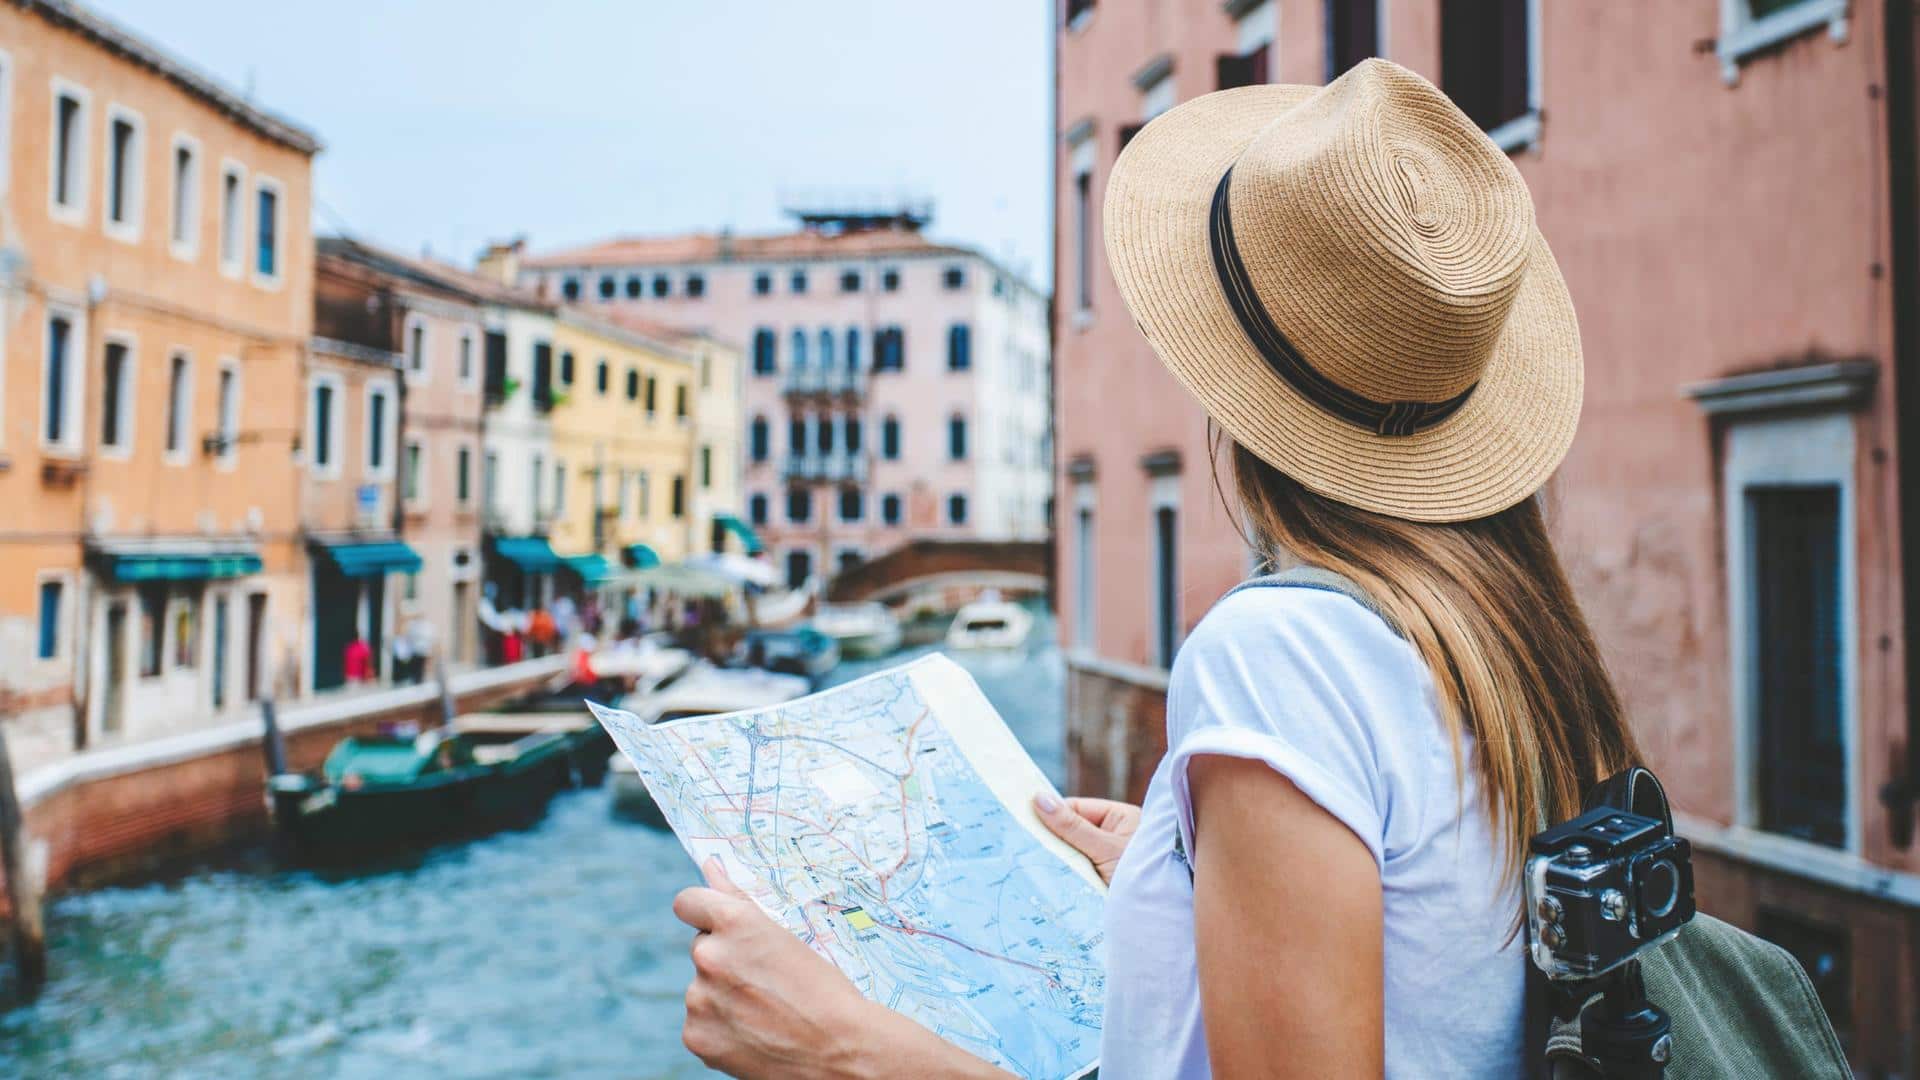 Common tourist mistakes you must avoid in Italy